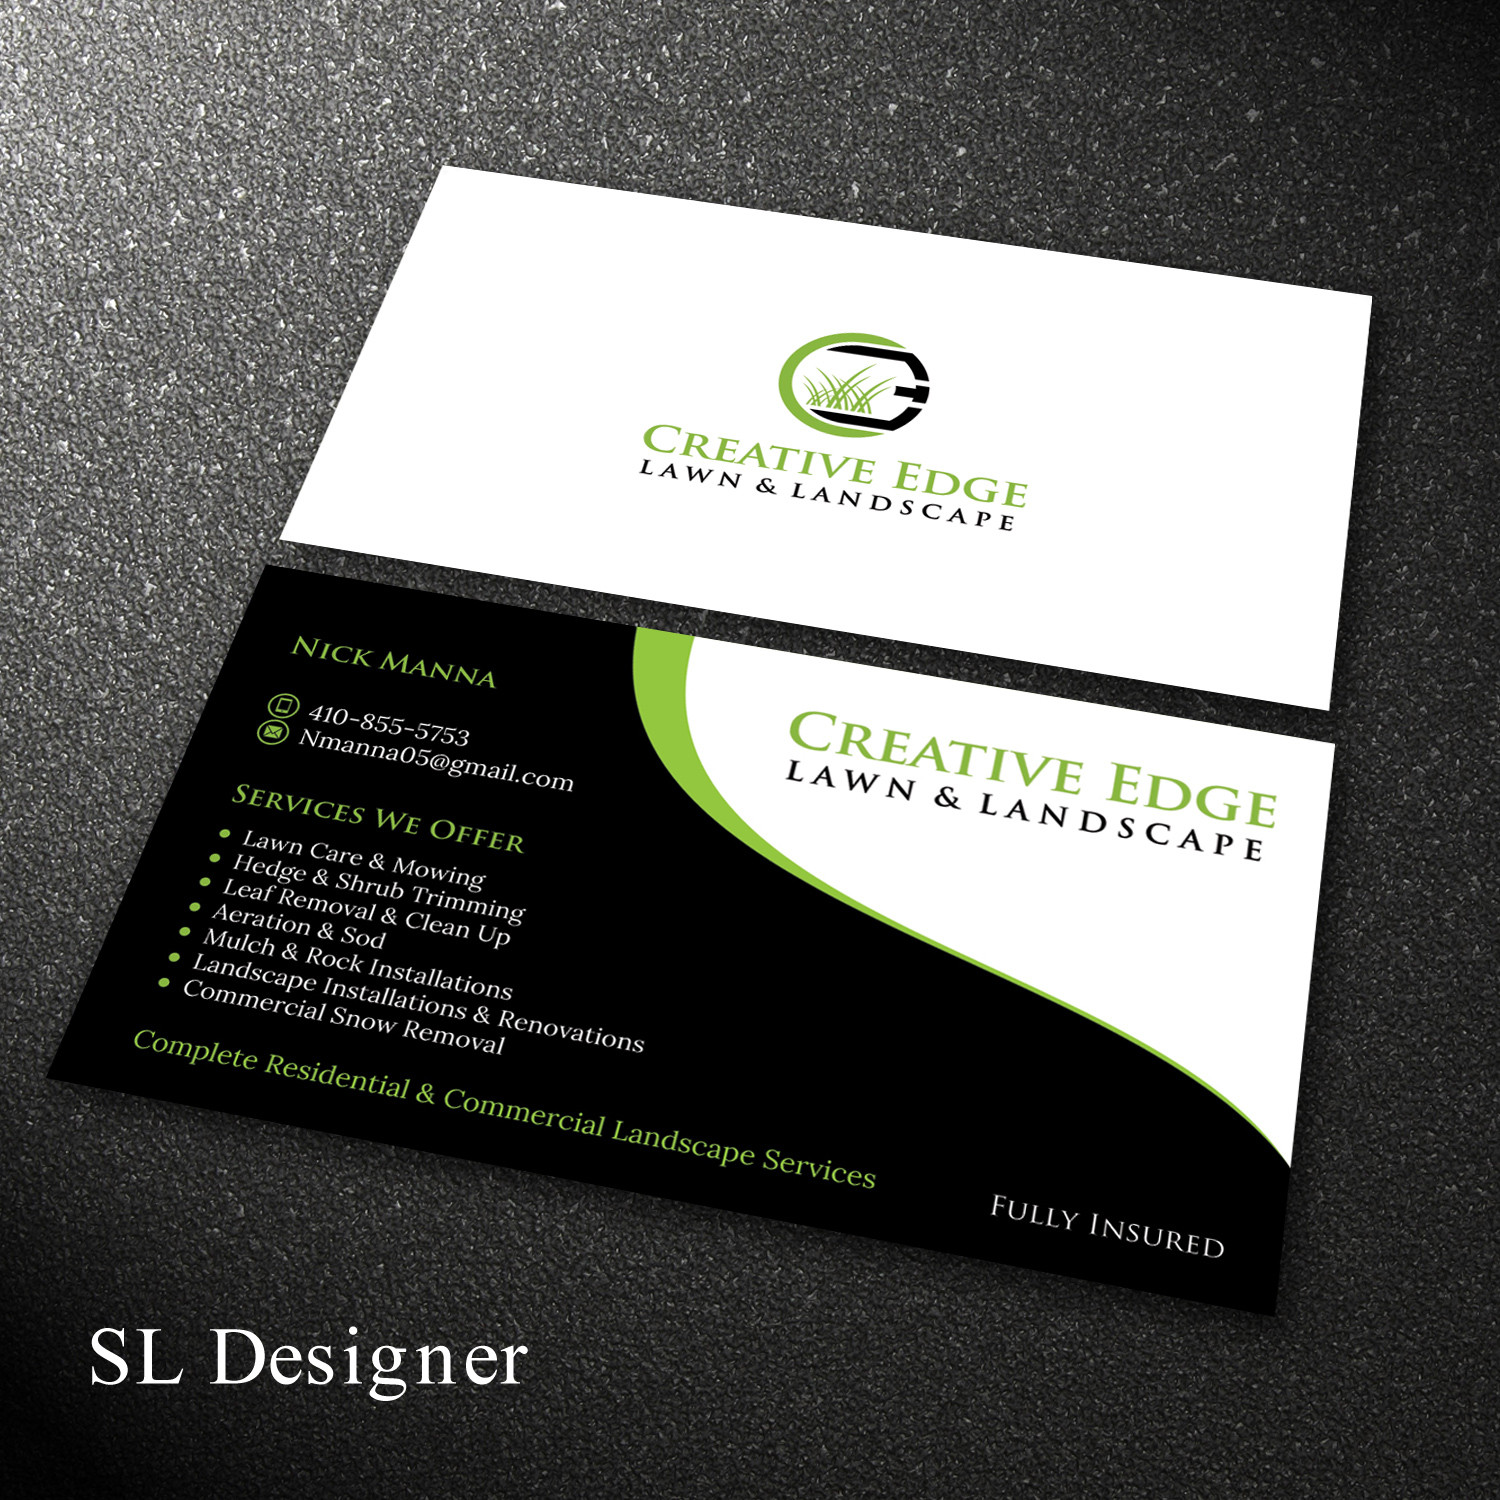 Landscaping Business Cards Templates Free Sample Kit Maker Of Business Cards Templates Free Online